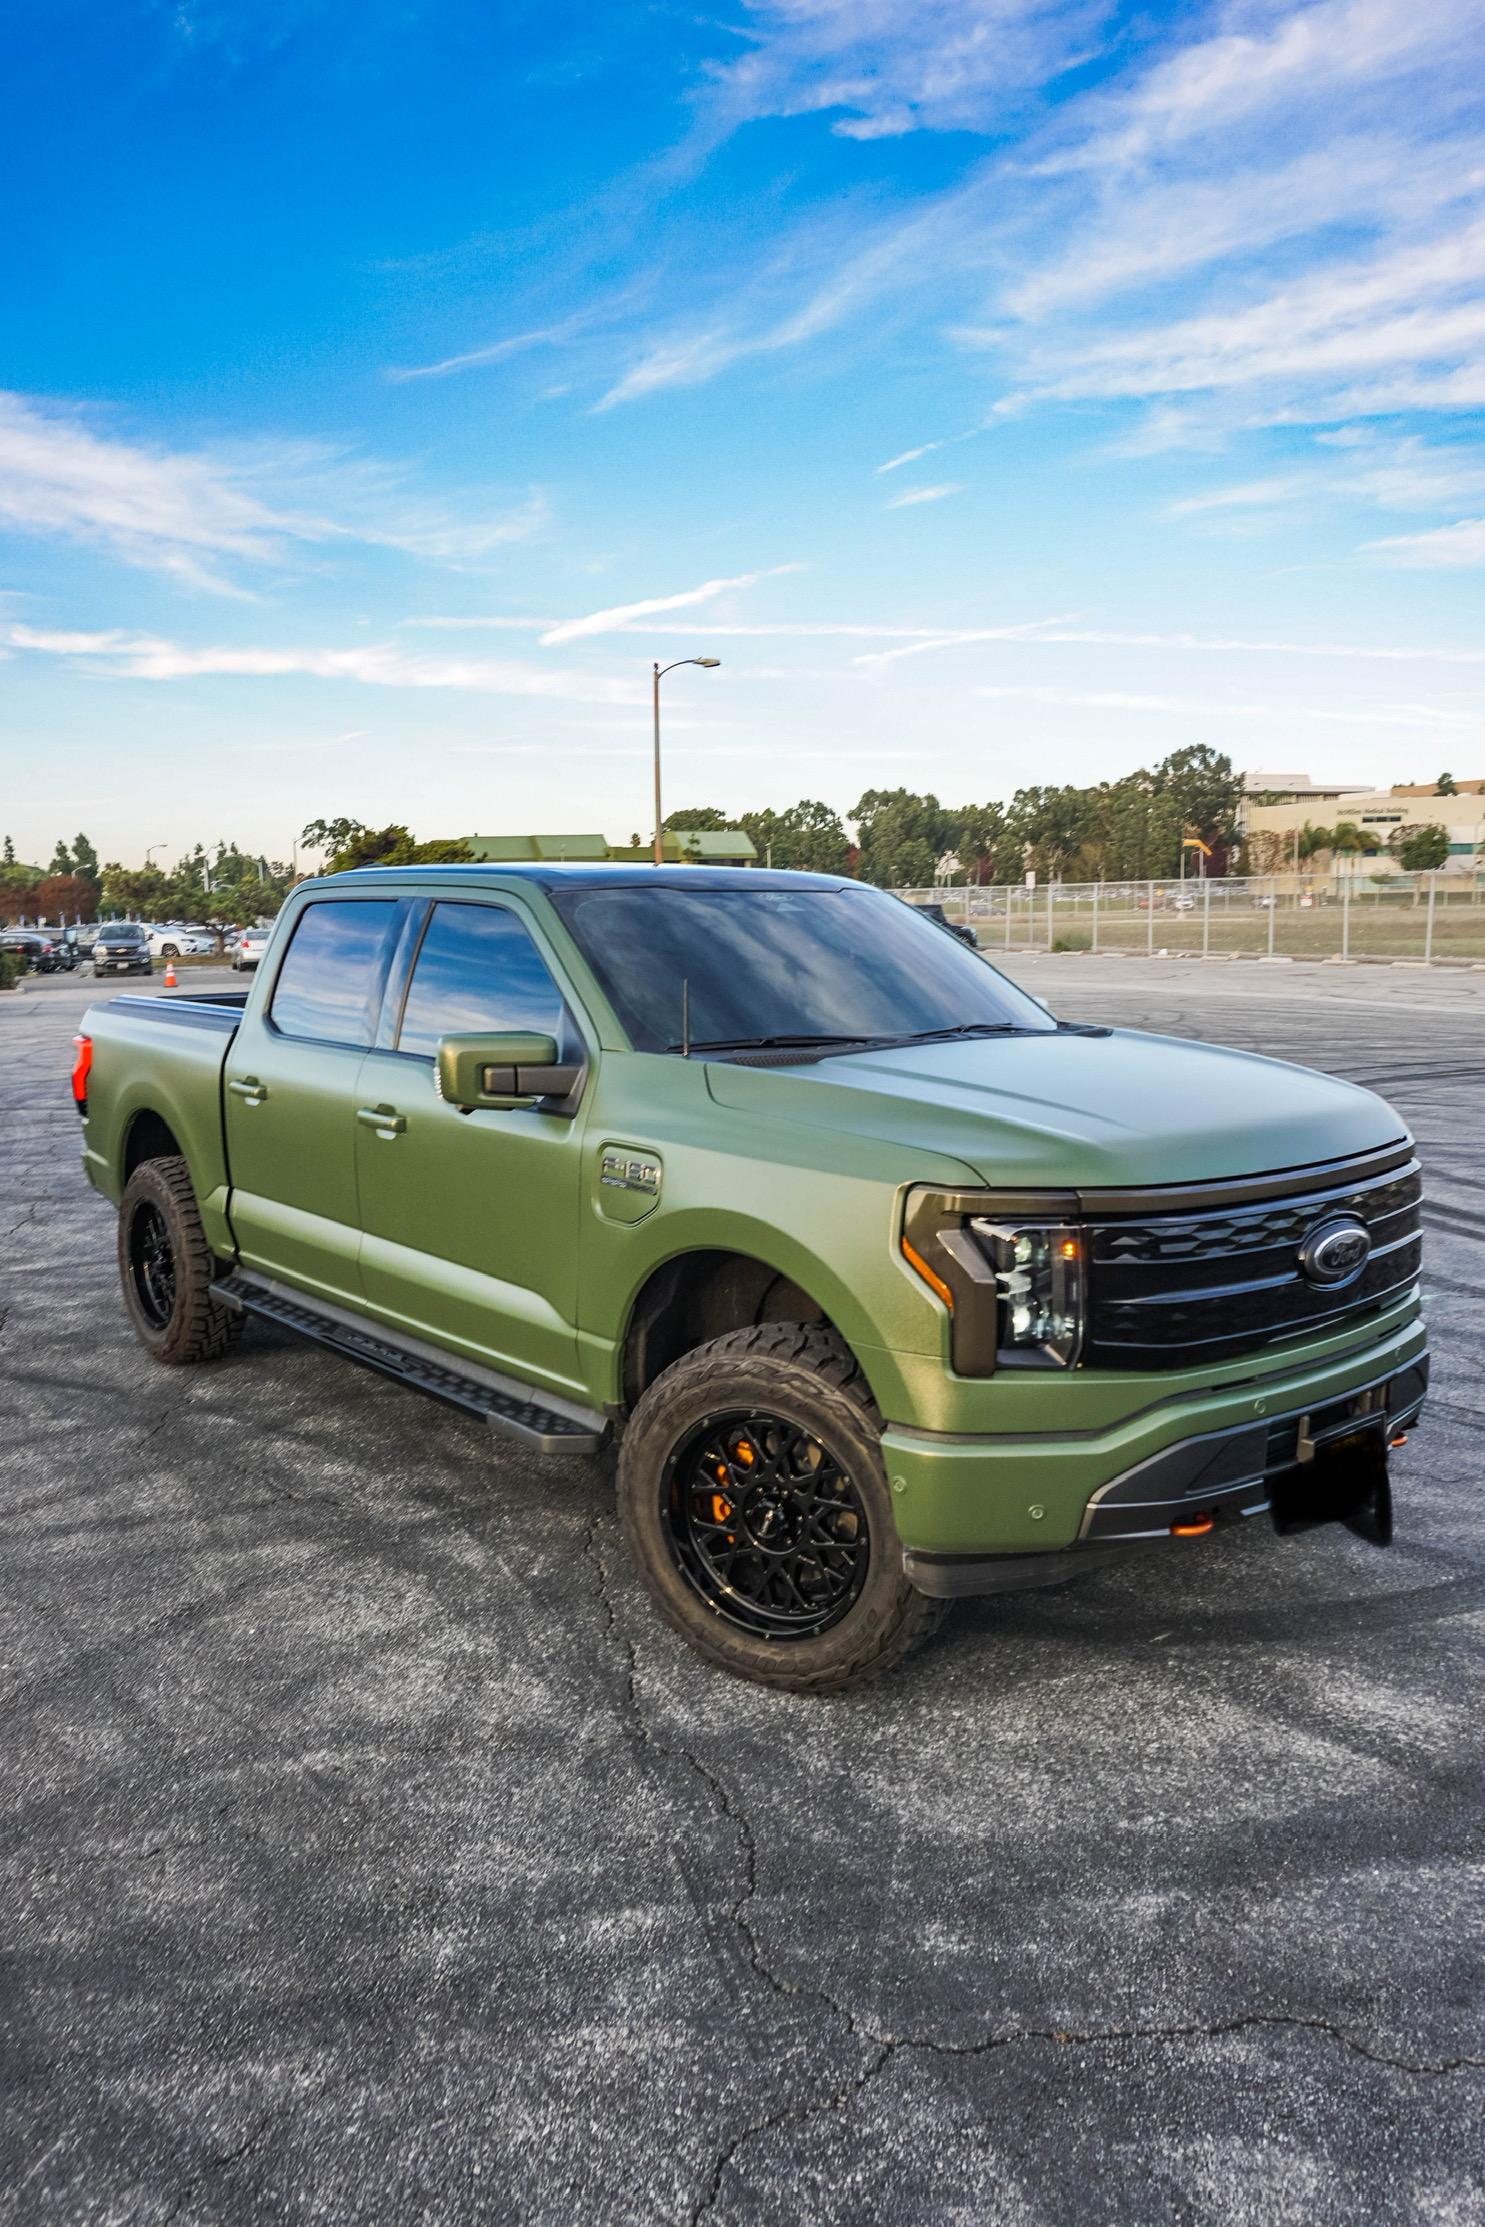 Ford F-150 Lightning My wife isn’t happy, but worth it: 2022 F-150 Lightning Build w/ green wrap & many other mods DB1B5D2D-E5FA-45C6-A698-8674ADF30008